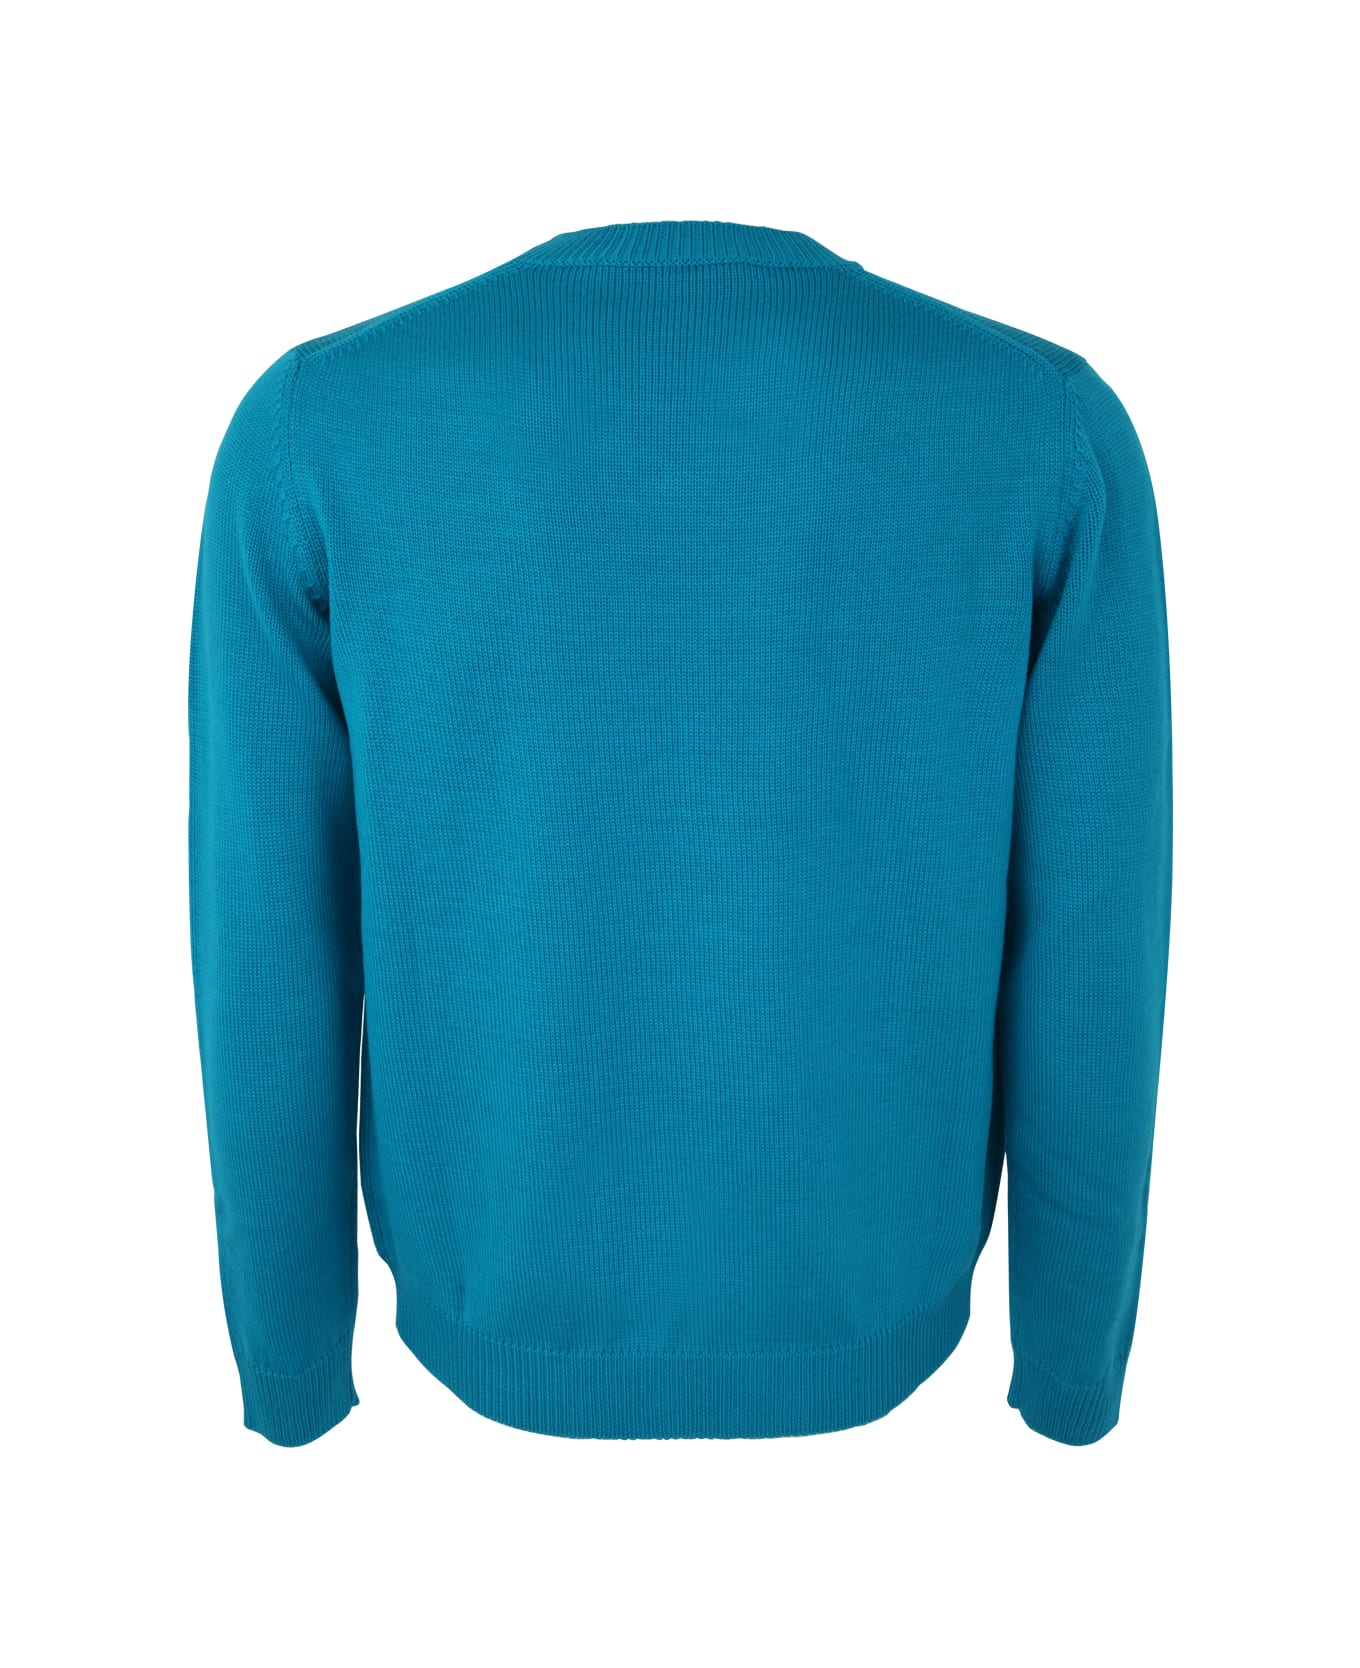 Nuur Long Sleeve Crew Neck Sweater - Turquoise